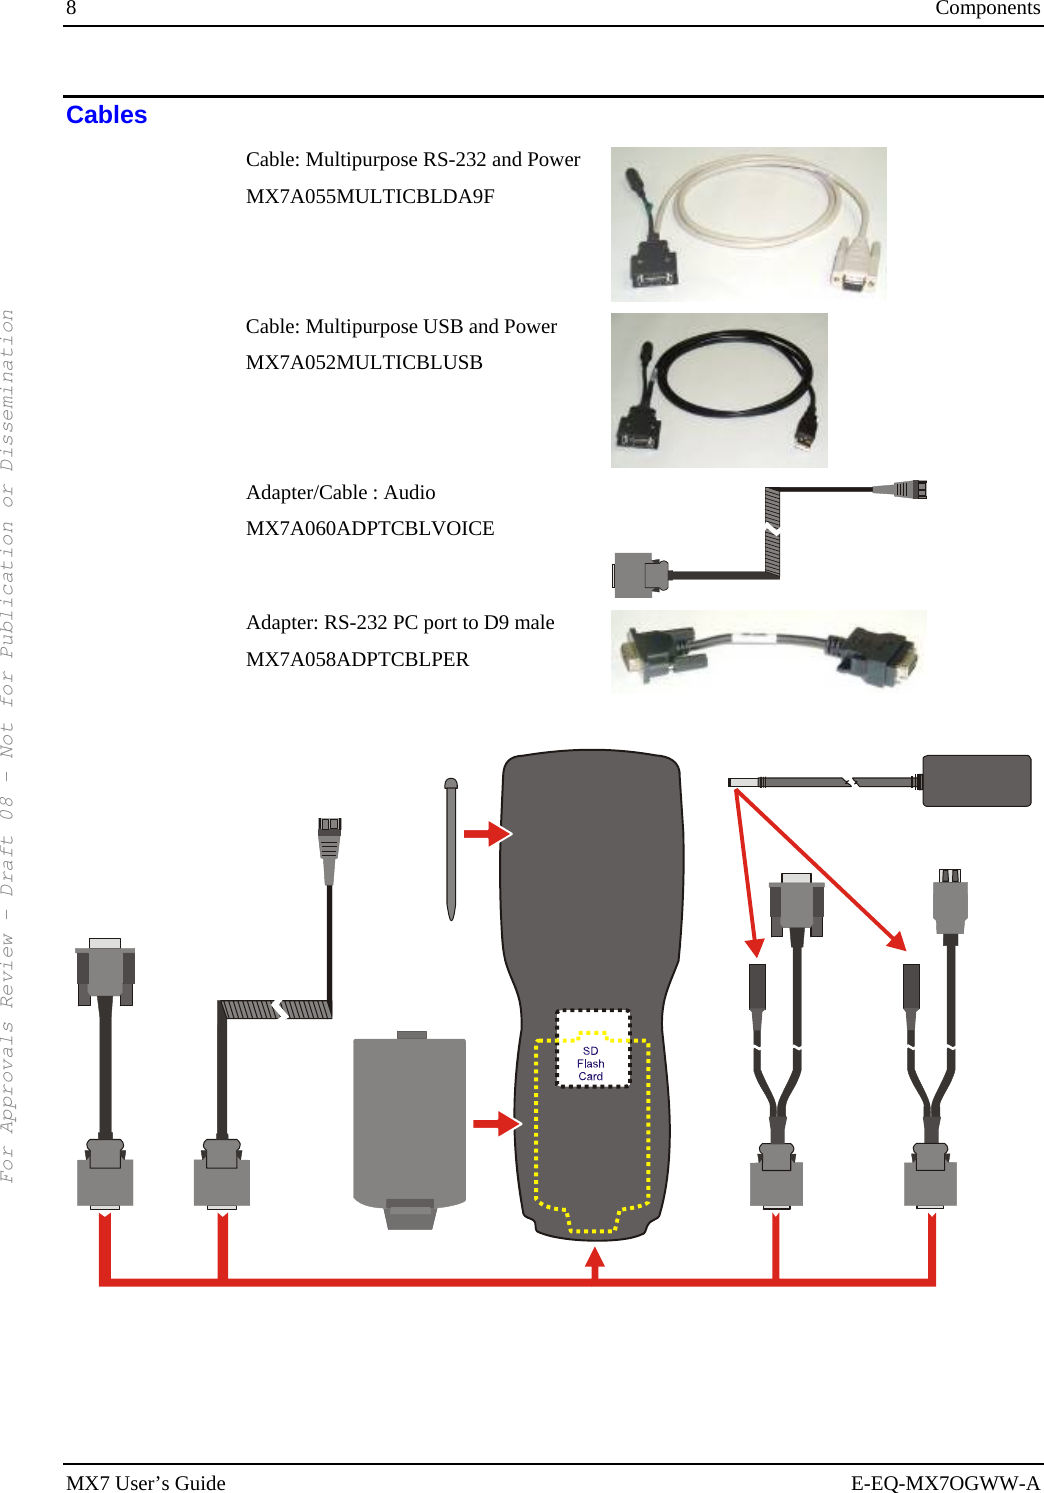 8  Components MX7 User’s Guide  E-EQ-MX7OGWW-A Cables Cable: Multipurpose RS-232 and Power MX7A055MULTICBLDA9F  Cable: Multipurpose USB and Power MX7A052MULTICBLUSB  Adapter/Cable : Audio MX7A060ADPTCBLVOICE  Adapter: RS-232 PC port to D9 male MX7A058ADPTCBLPER      For Approvals Review - Draft 08 - Not for Publication or Dissemination